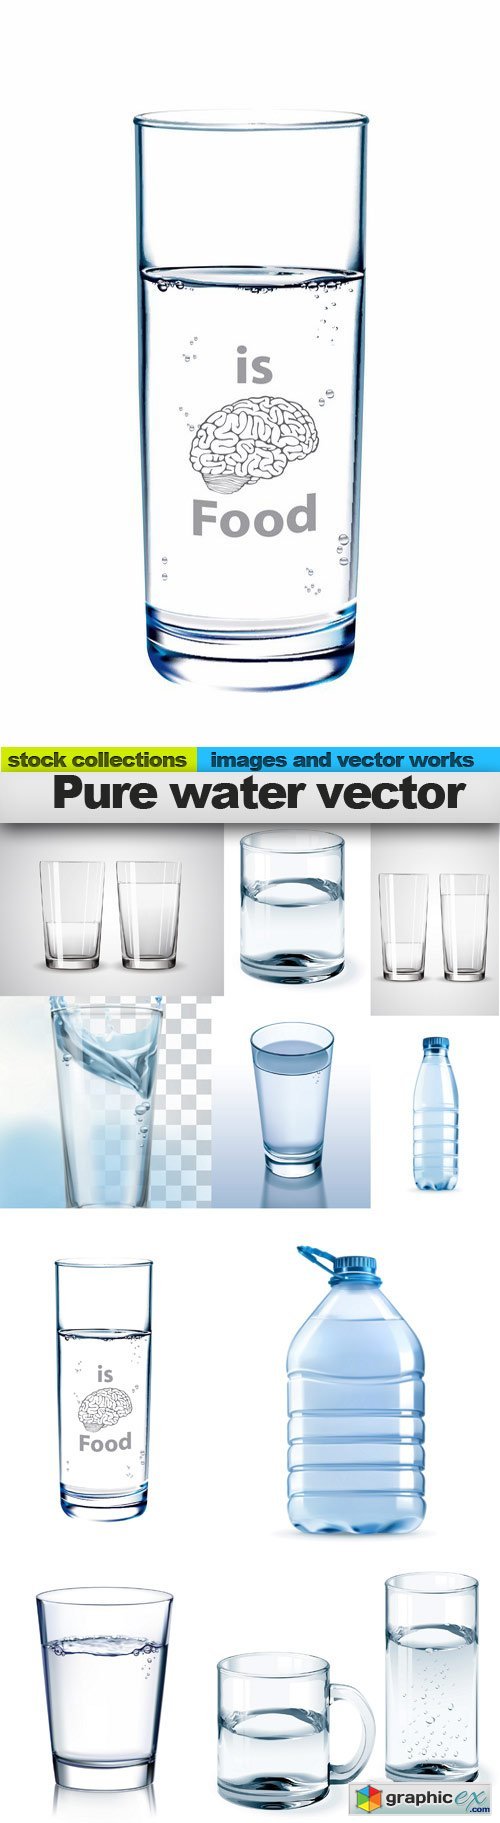 Pure water vector, 10 x EPS